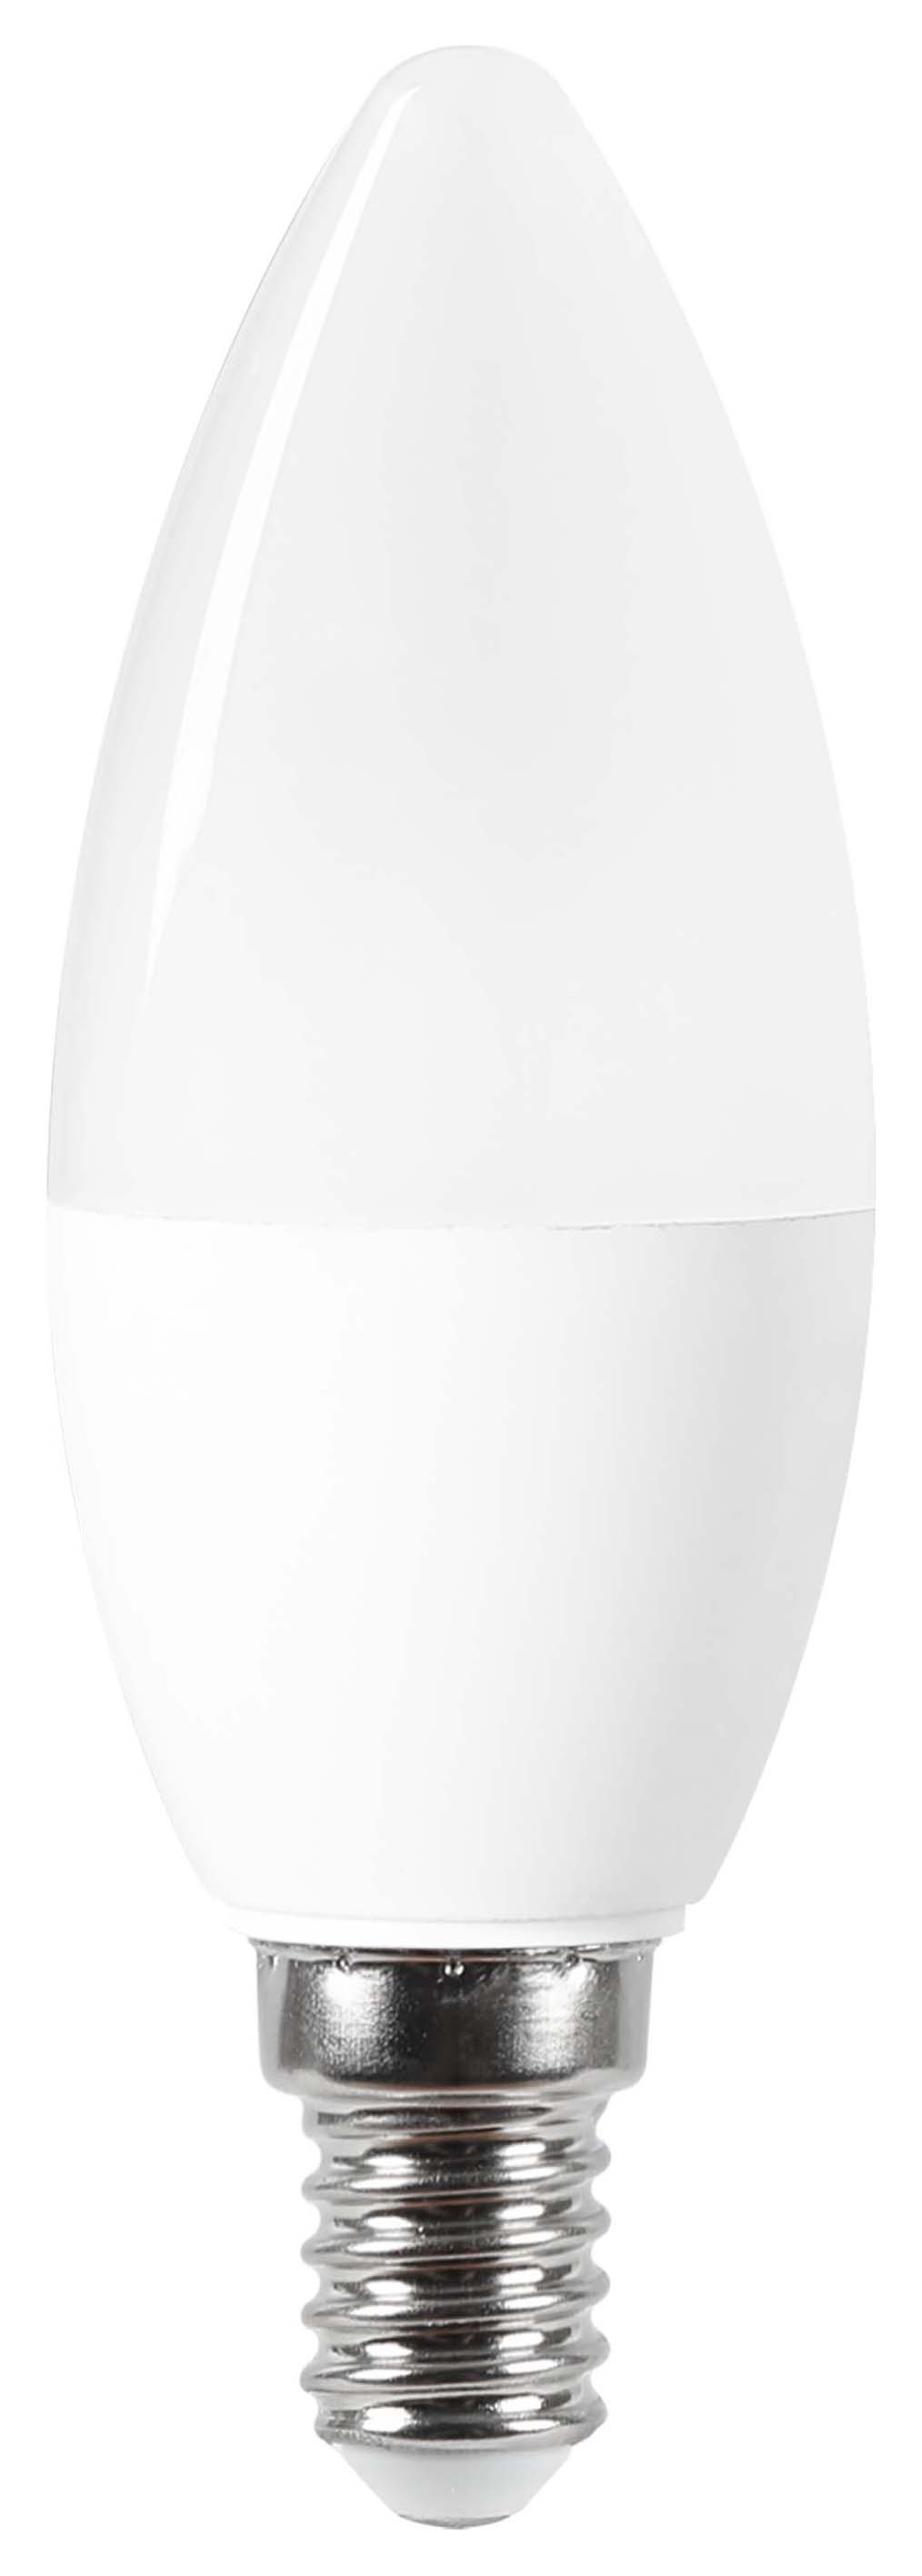 Image of Wickes Non-Dimmable Opal LED E14 Candle 7.2W Warm White Light Bulb - Pack of 4